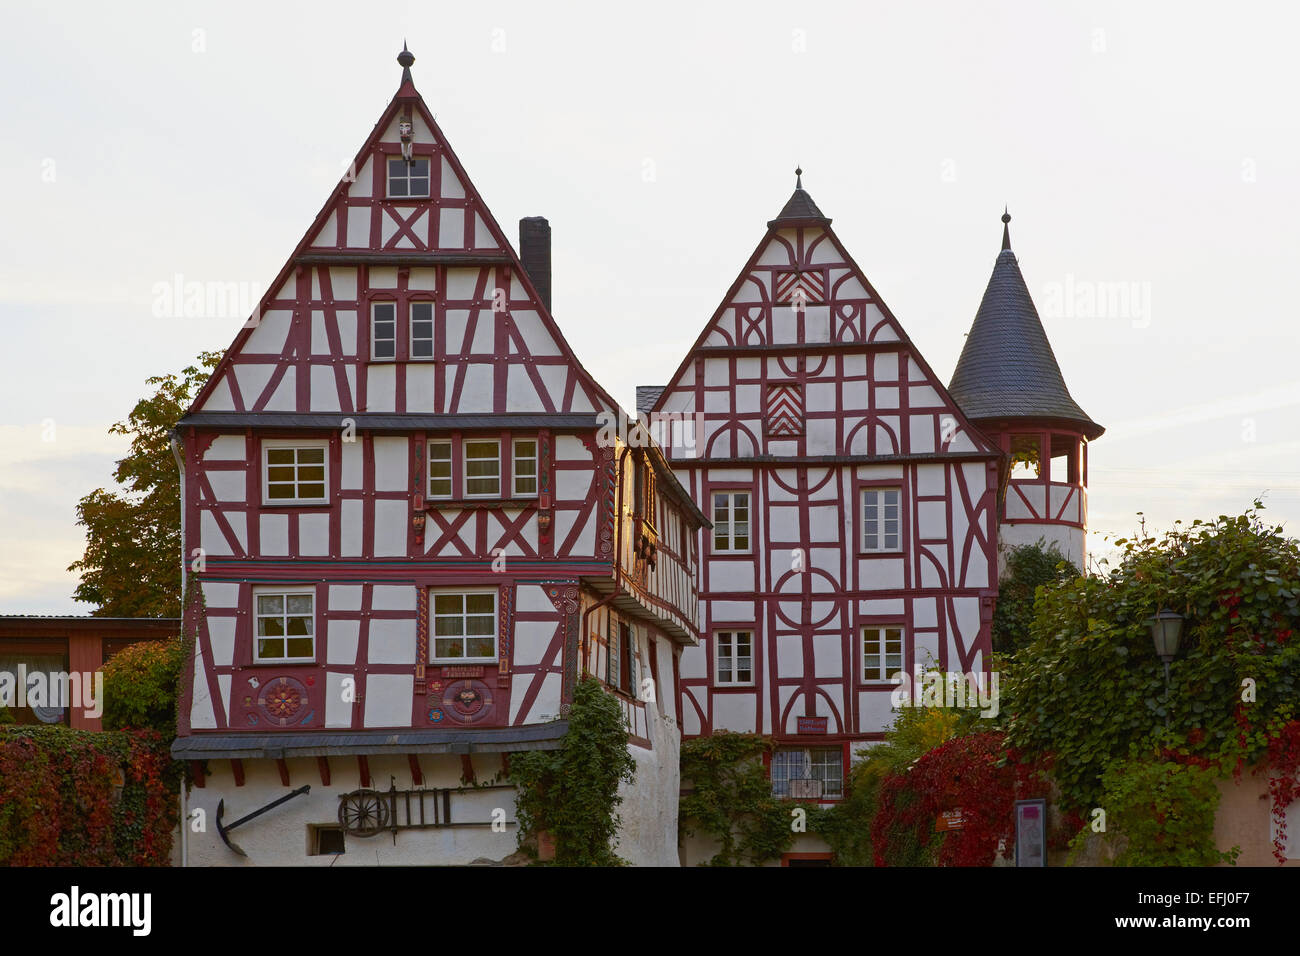 Altes Faehrhaus (1621), old ferryhouse and Altes Rathaus, old town hall, in Puenderich, Mosel, Rhineland-Palatinate, Germany, Eu Stock Photo